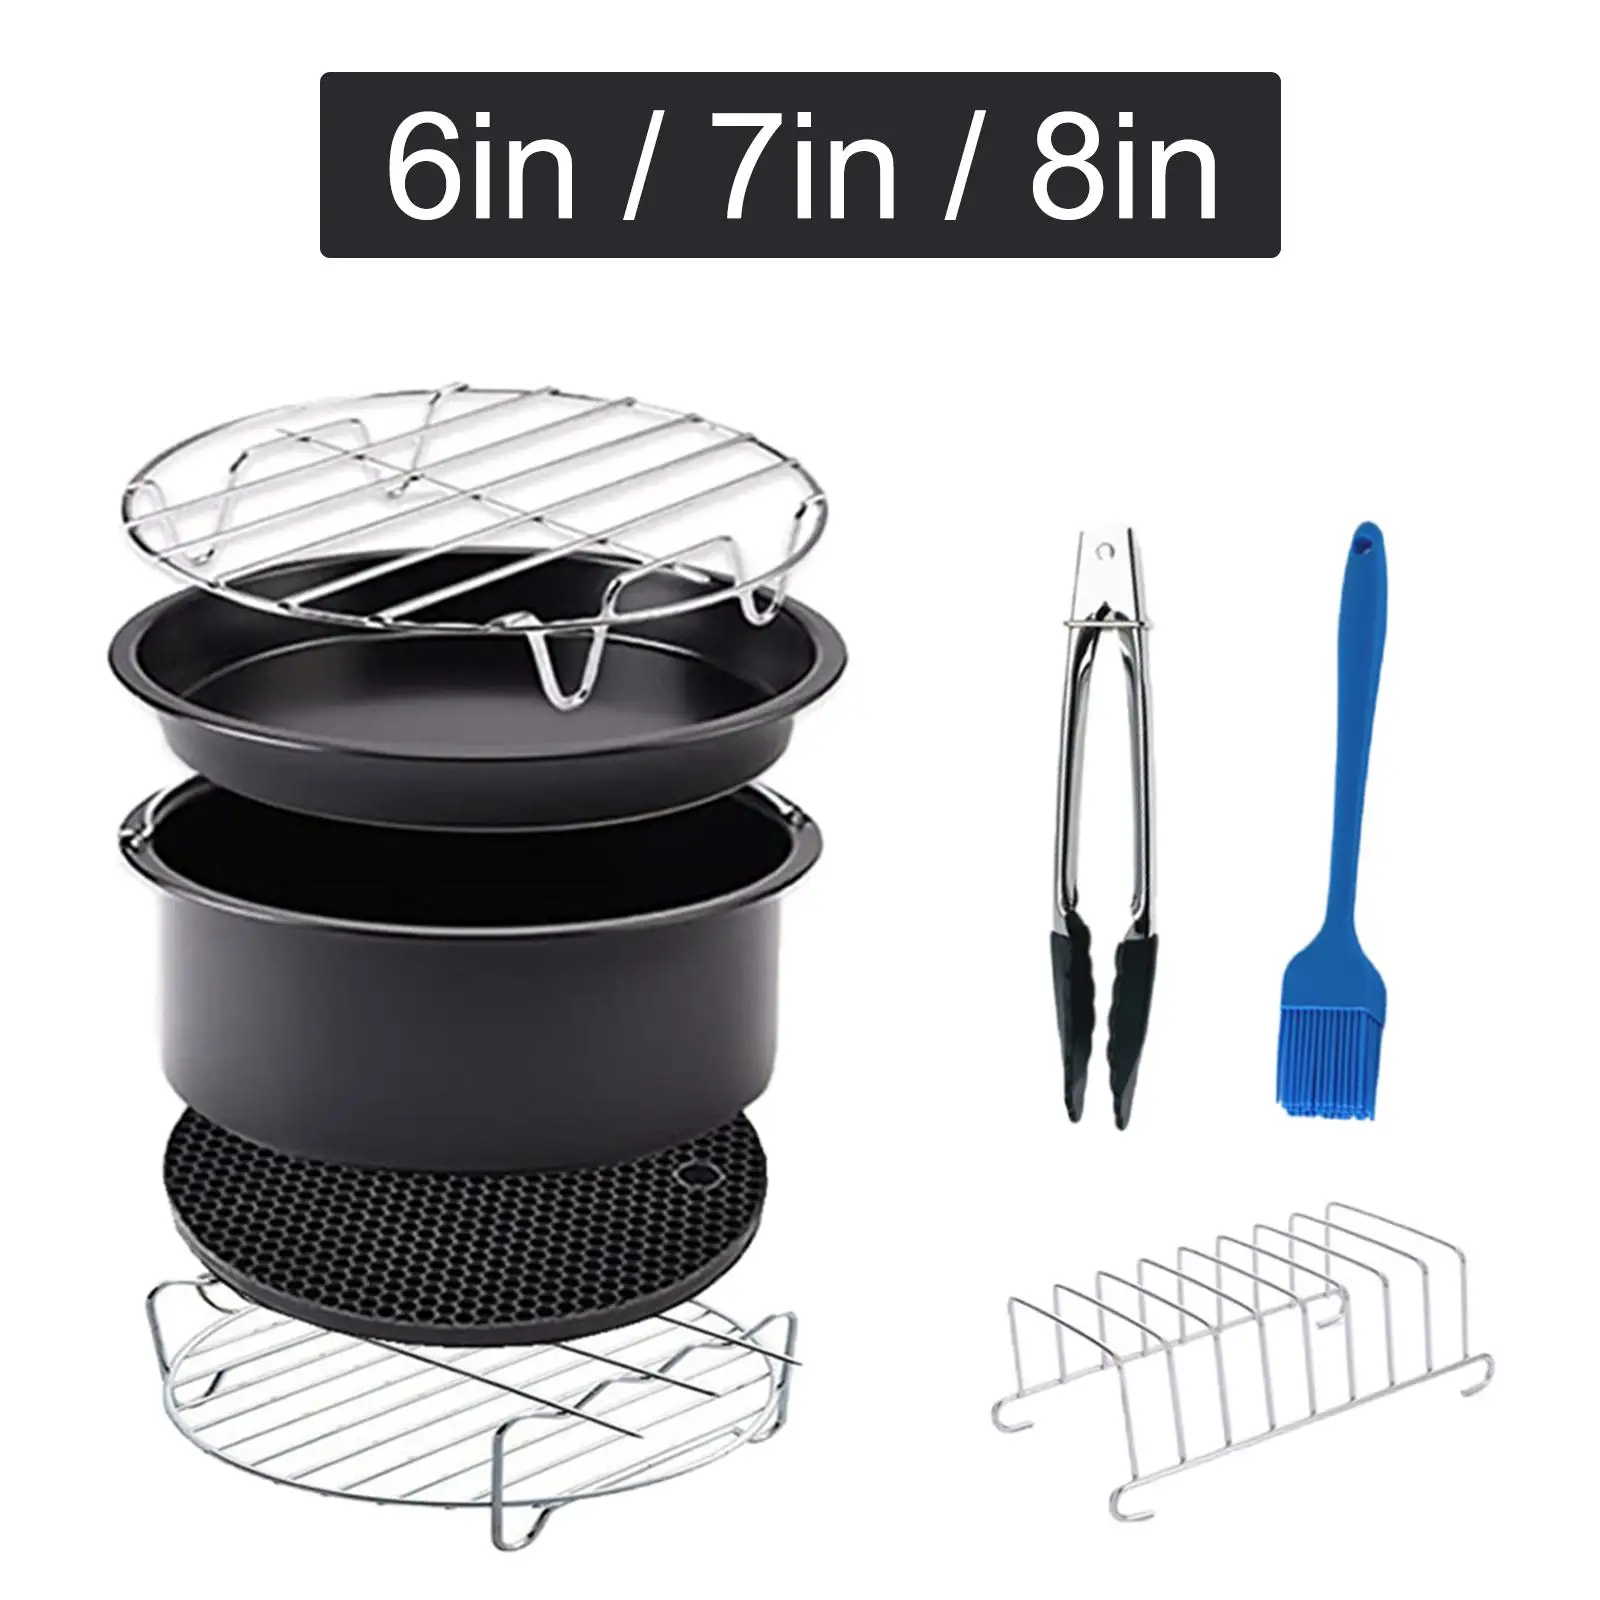 6inch/7inch/8inch Air Fryer Accessories Oil Brush Food Tongs Cake Pan Pizza Pan Toasting Rack for Household BBQ Kitchen